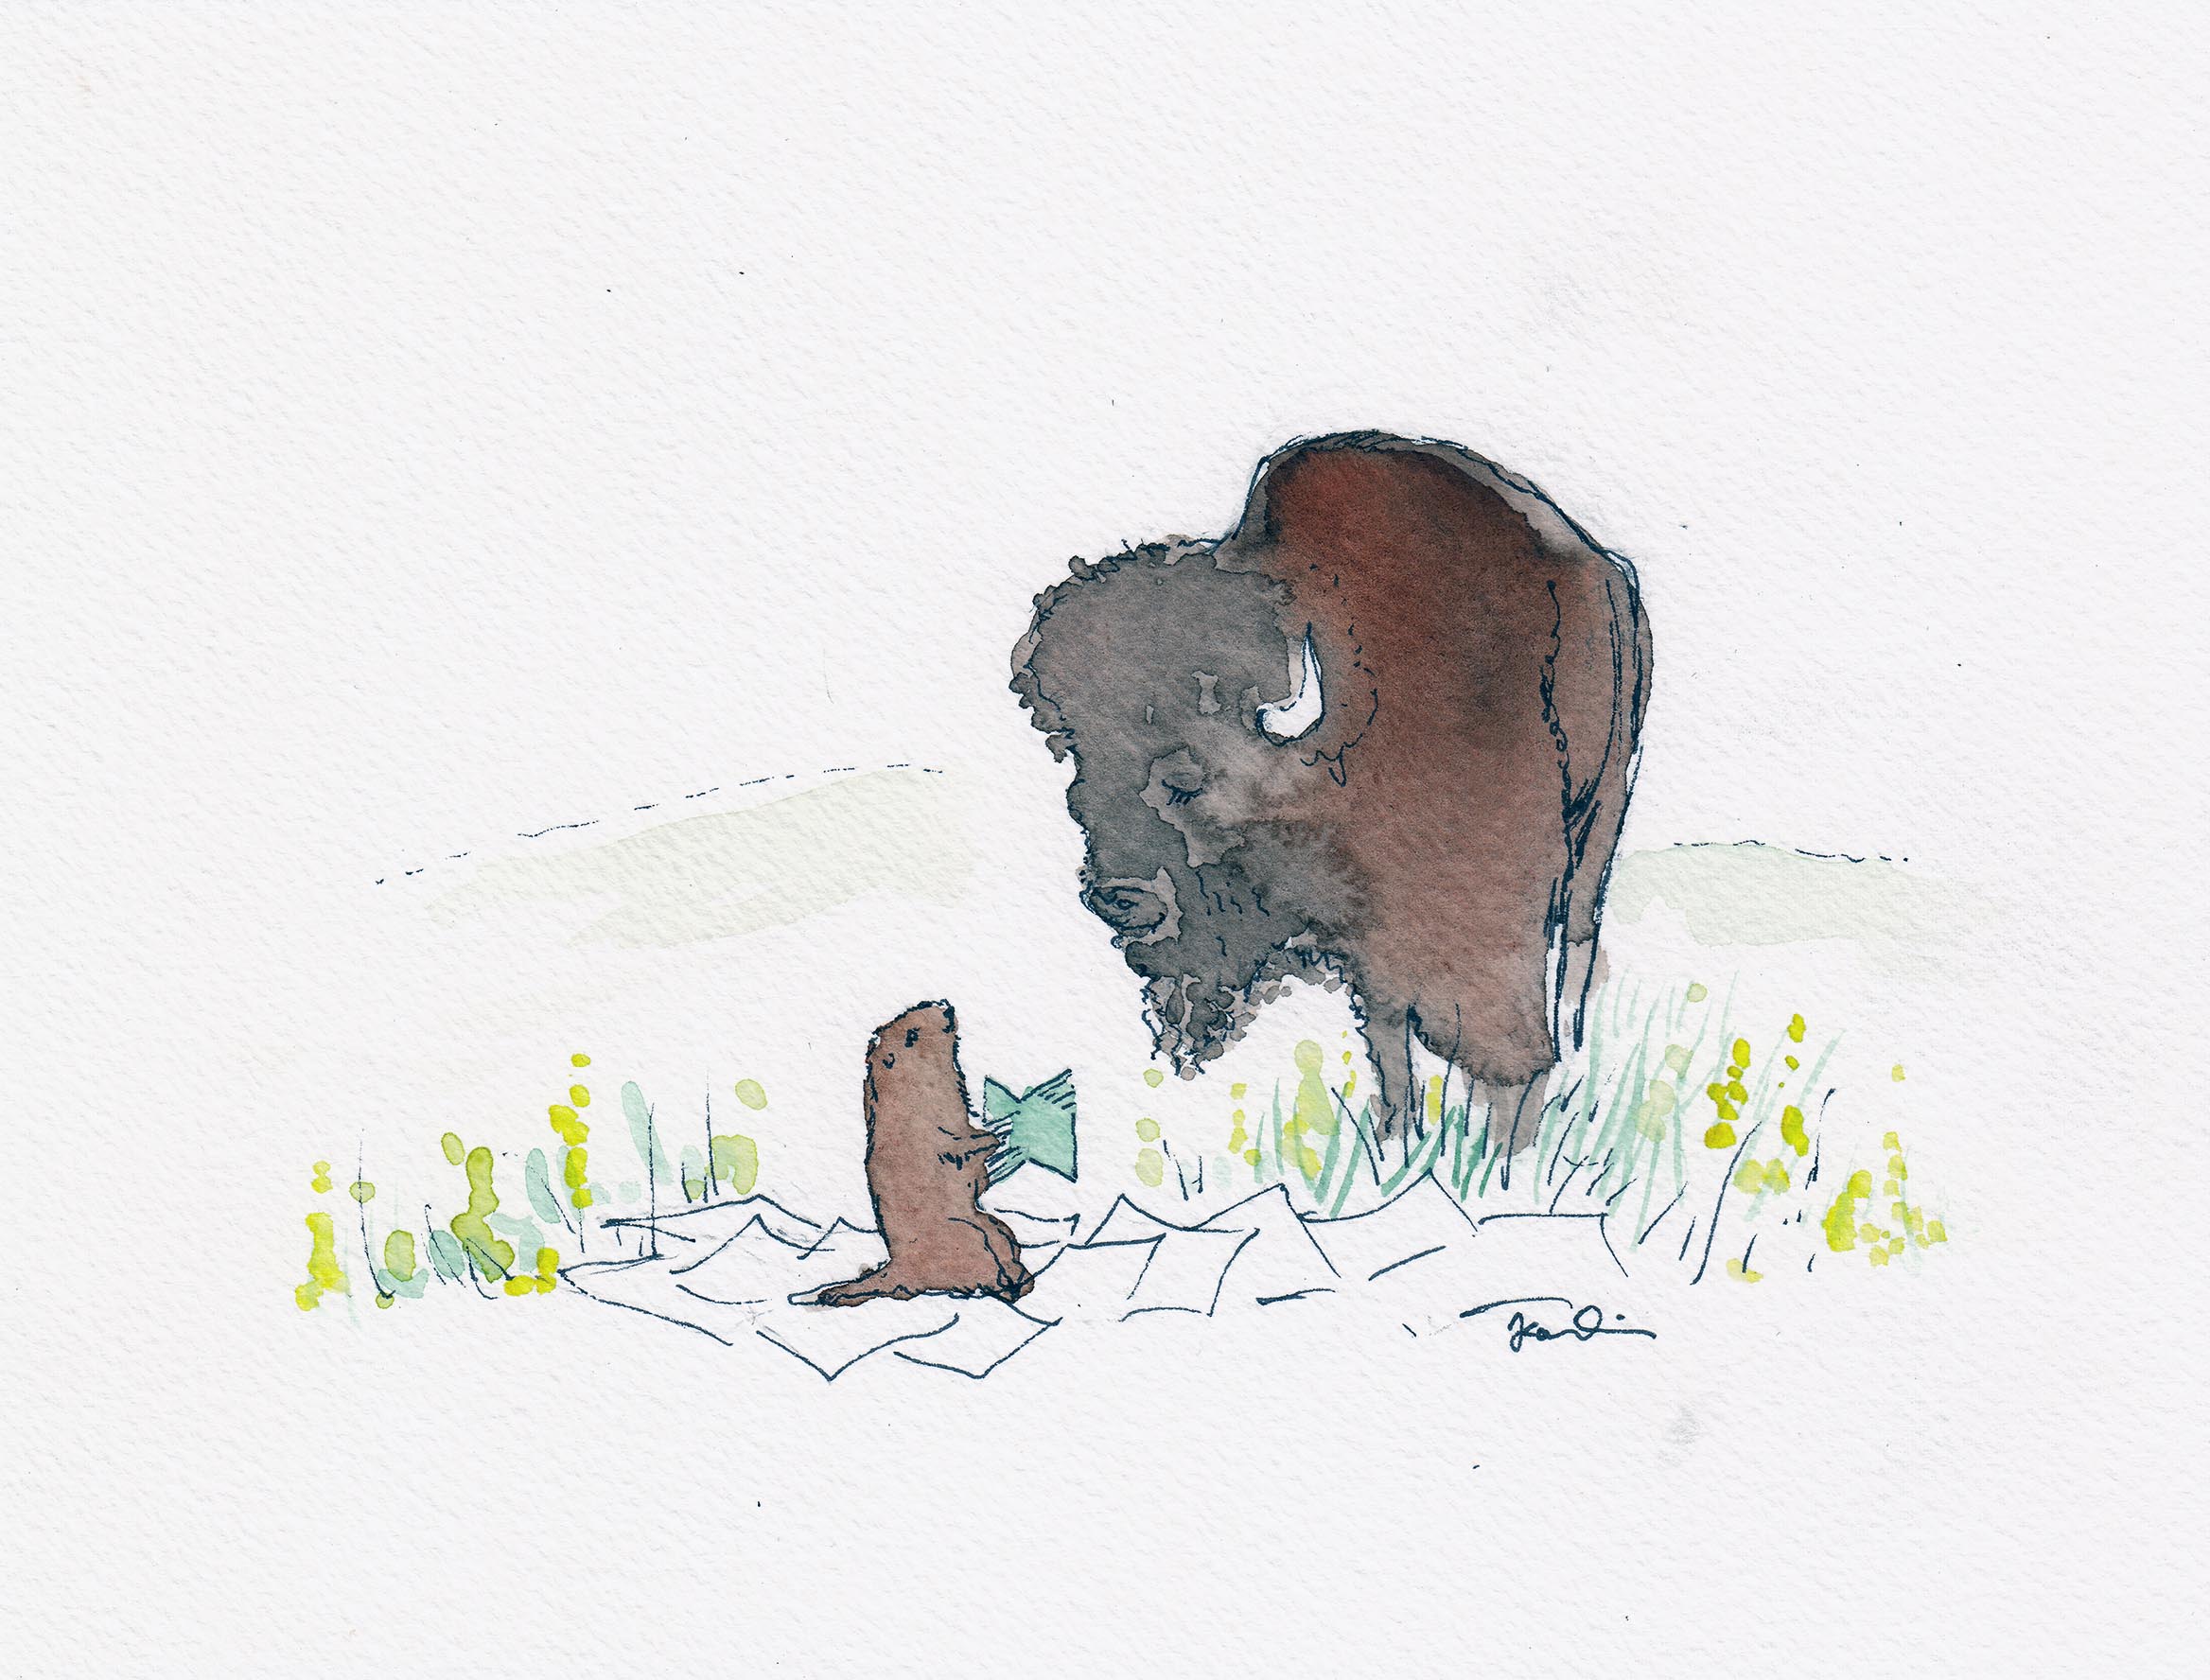 watercolor illustration of a buffalo staring down at a cute gopher sitting in the grass amid blank pages of paper, holding the Manifold logo